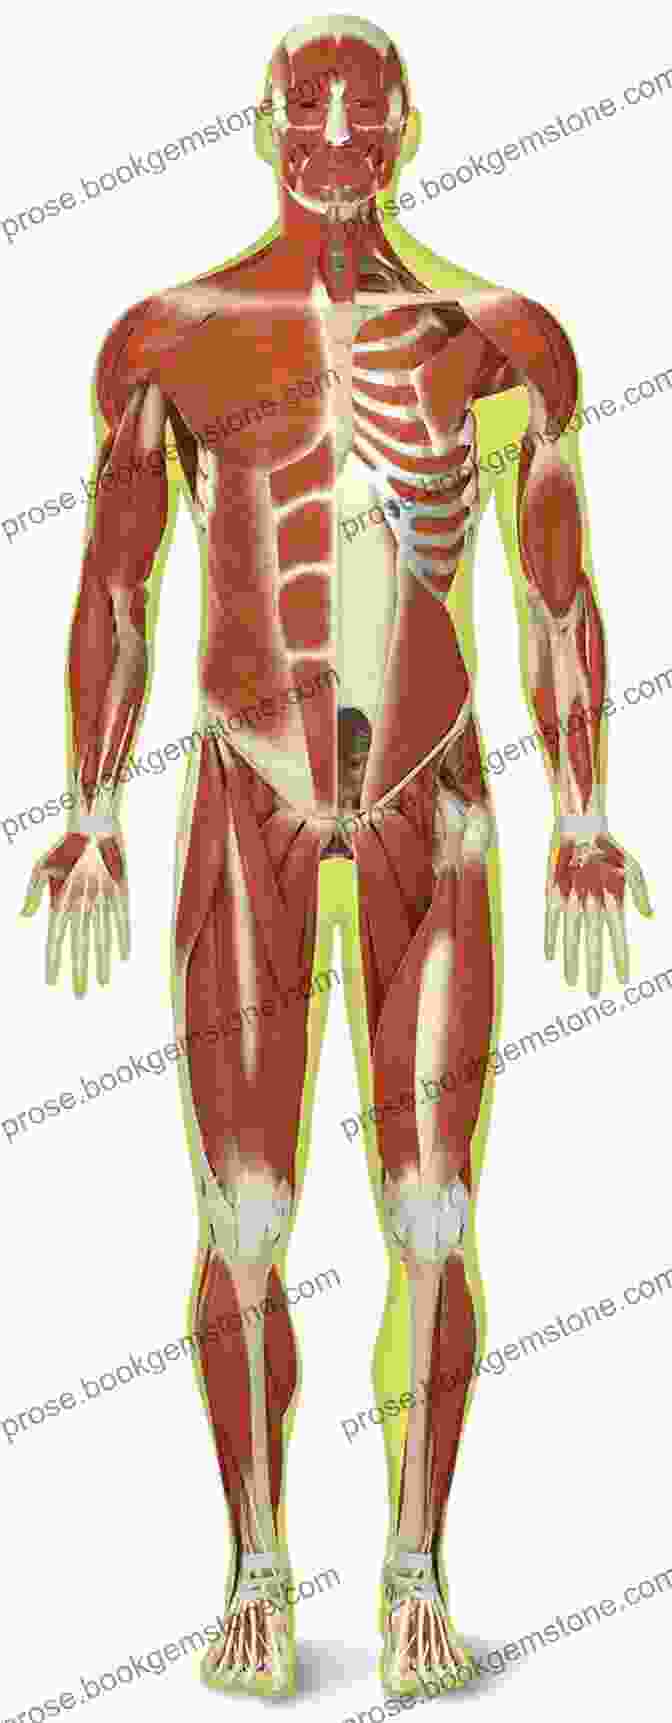 The Muscular System Of The Human Body Anatomy And Construction Of The Human Figure (Dover Art Instruction)